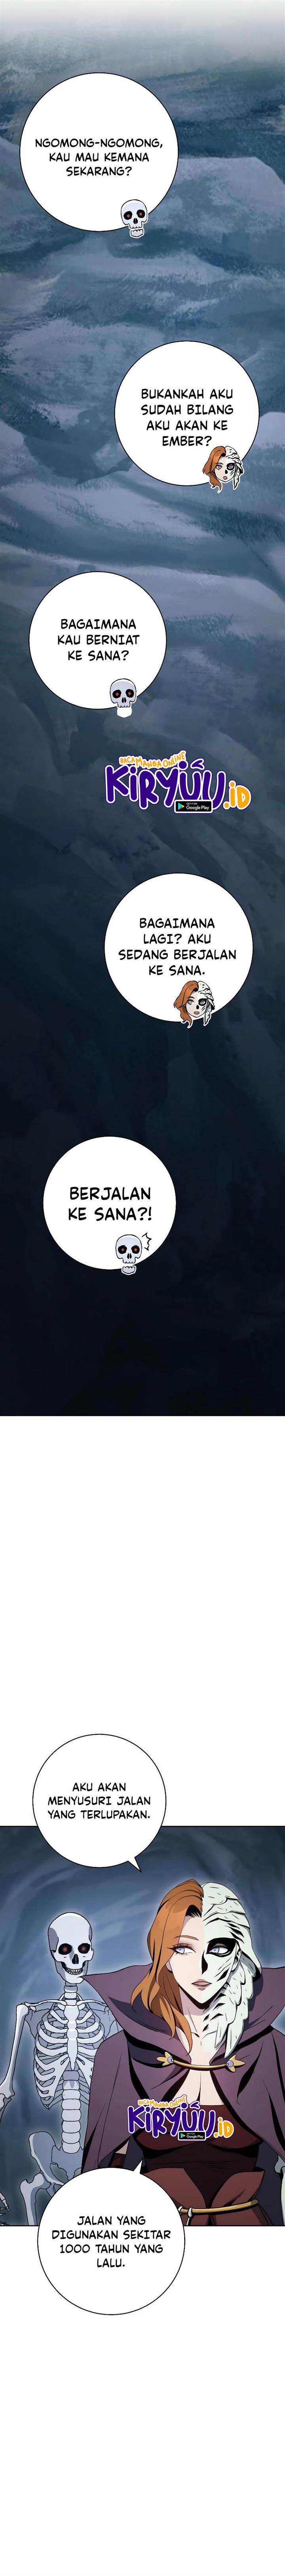 Skeleton Soldier Couldn’t Protect the Dungeon Chapter 205